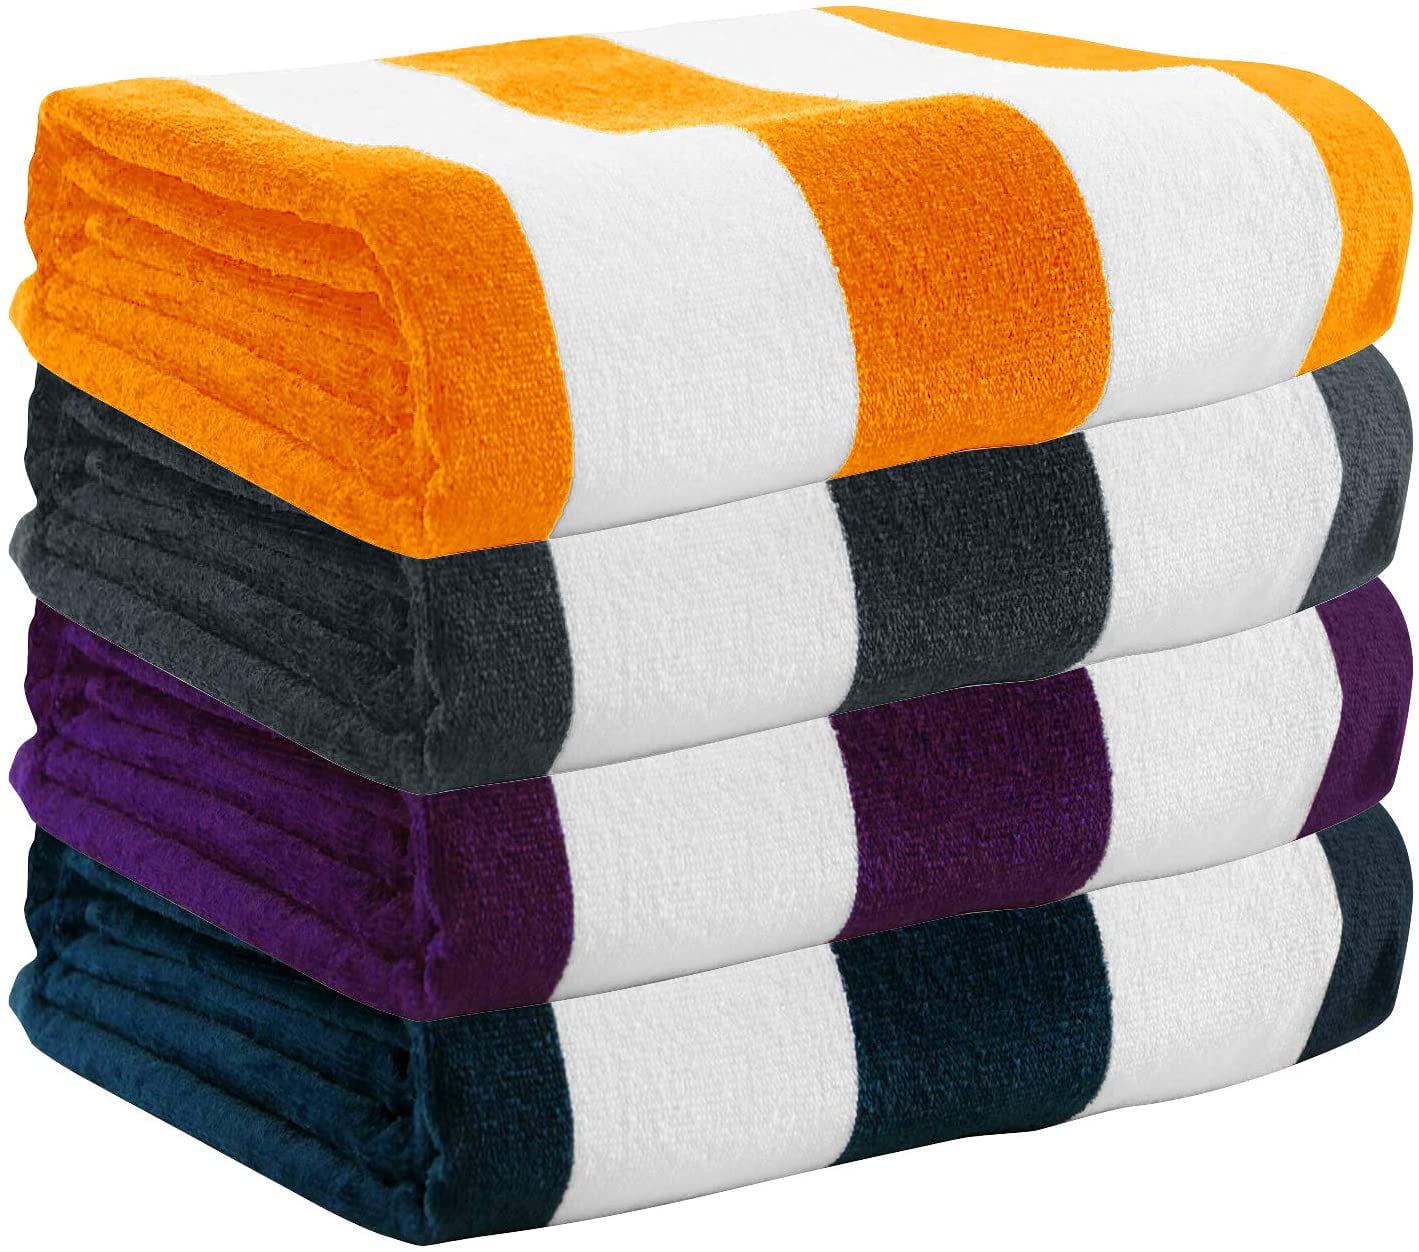 Navy, 4 Pack- 30 x 60 4 Pack Plush Velour 100% Cotton Beach Towels Cabana Stripe Pool Towels for Adults. 